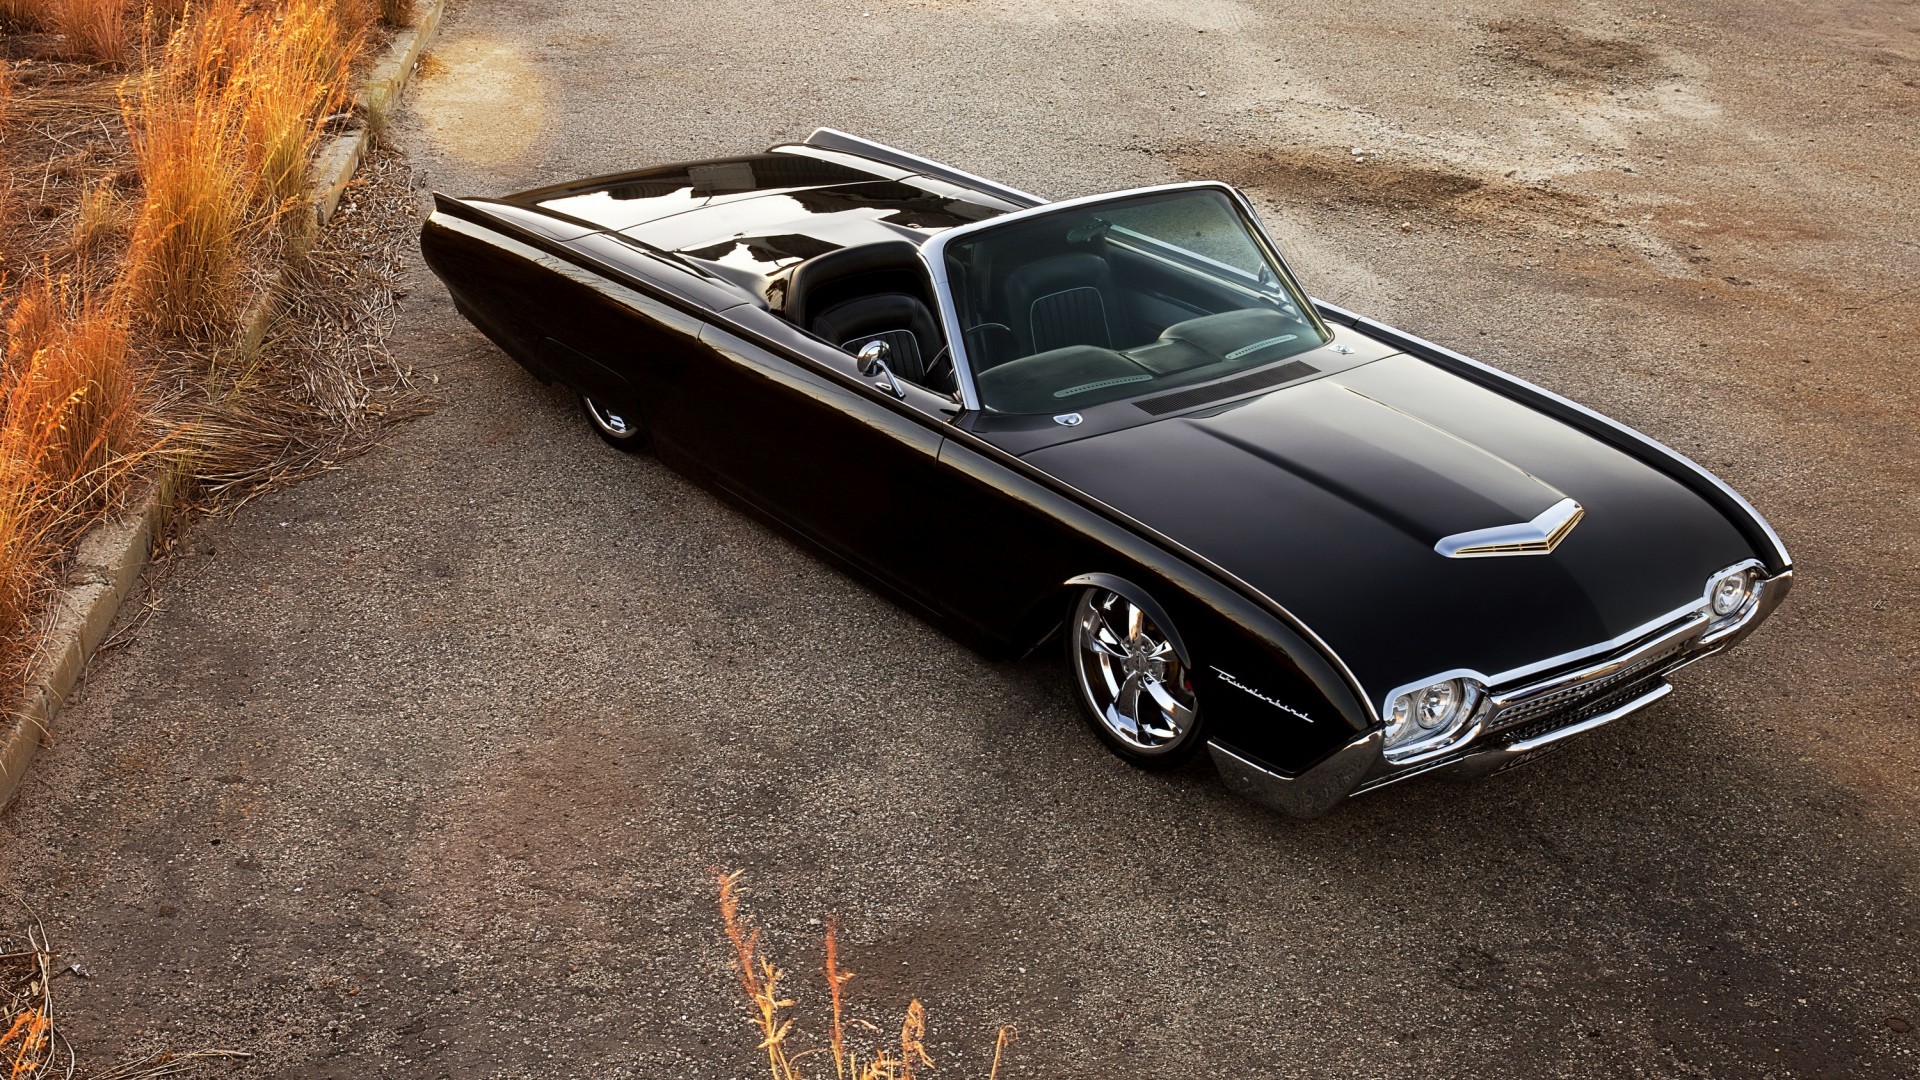 ford, Thunderbird, Classic, Car, Classic, Tuning, Hot, Rods Wallpaper